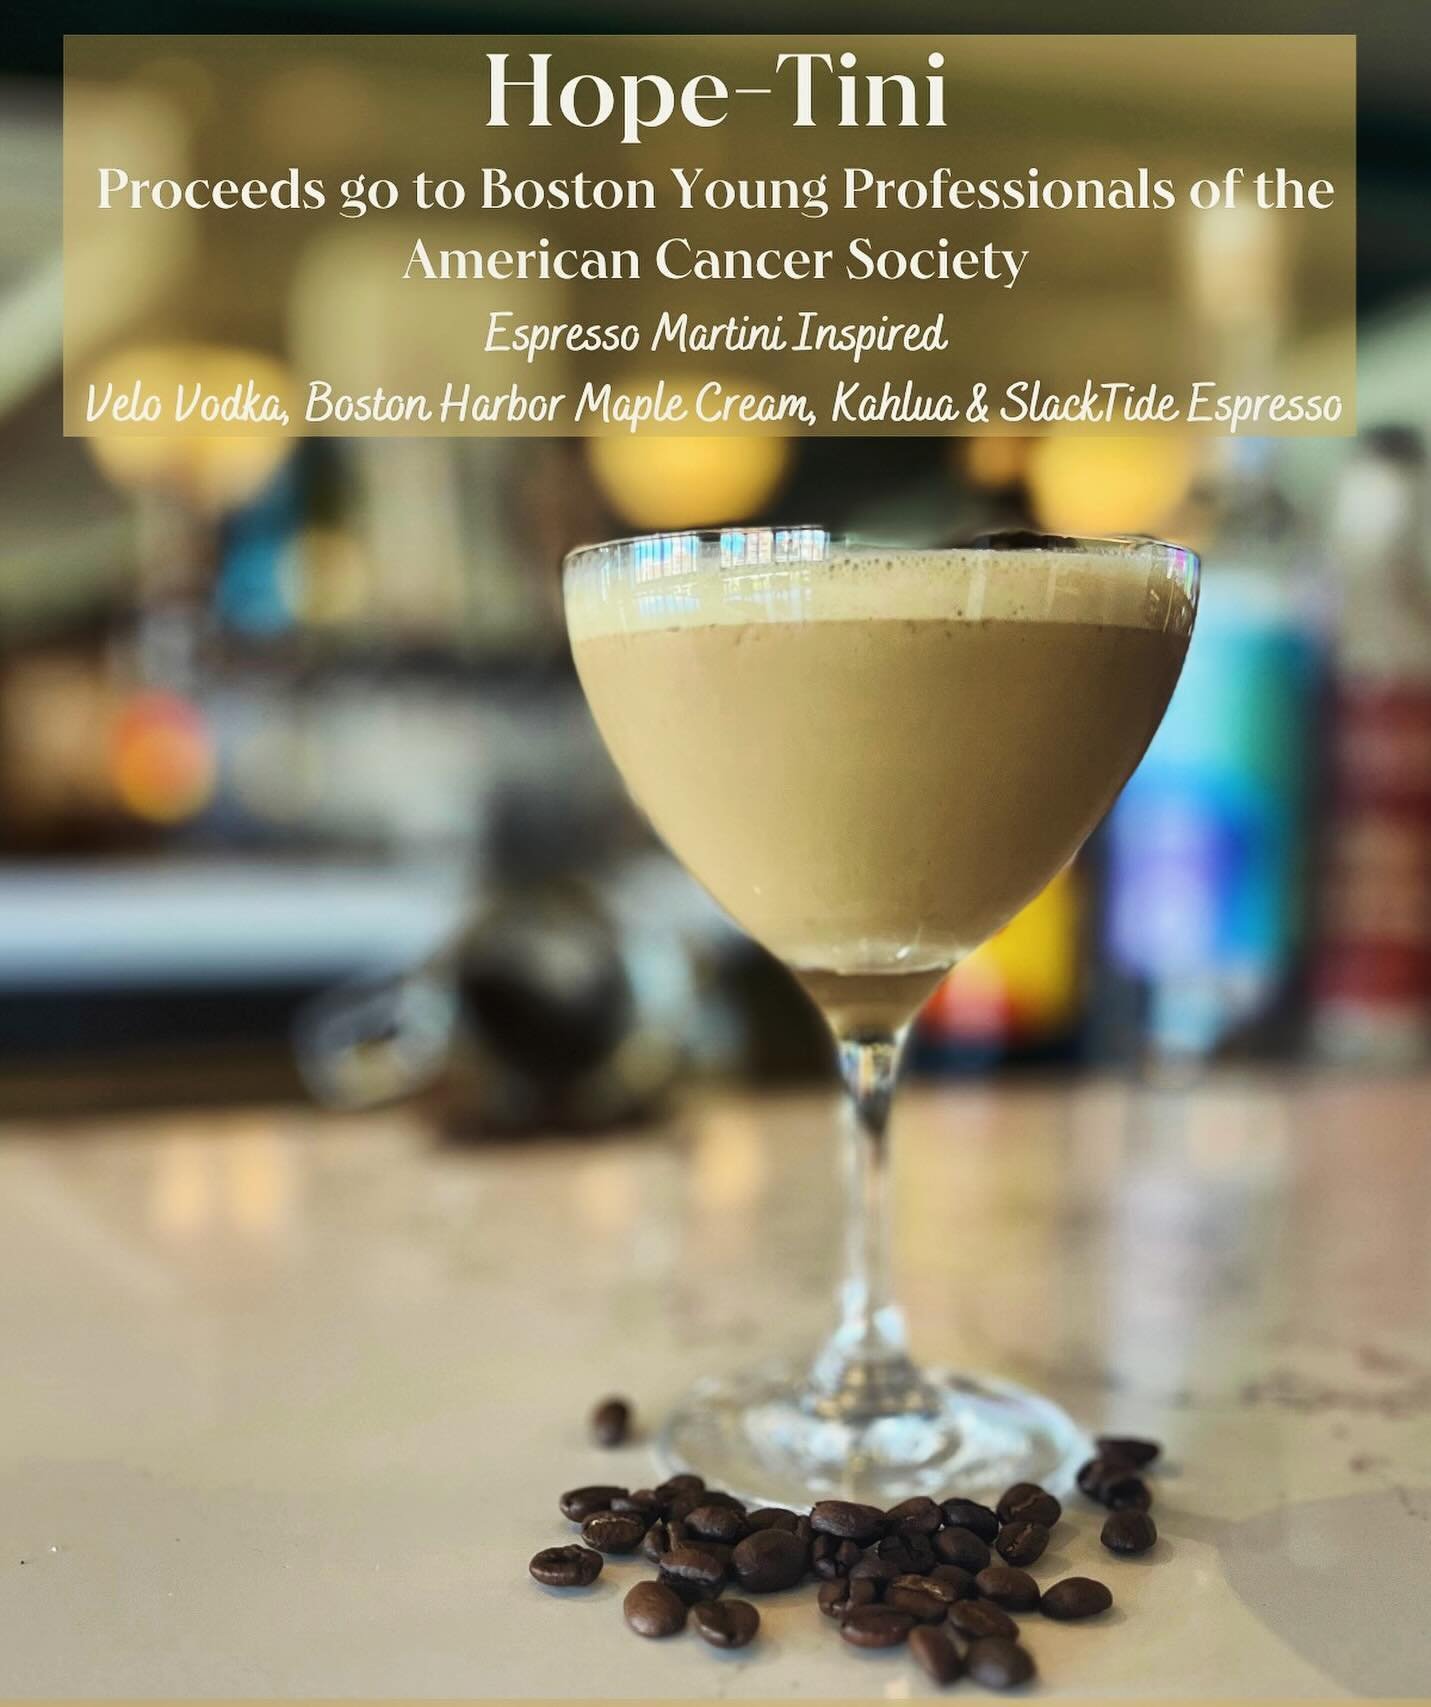 Come try our charity cocktail this month! Proceeds from the Hope-Tini will go to Boston Young Professionals of the American Cancer Society. This espresso martini inspired cocktail is already flying off the shelves!